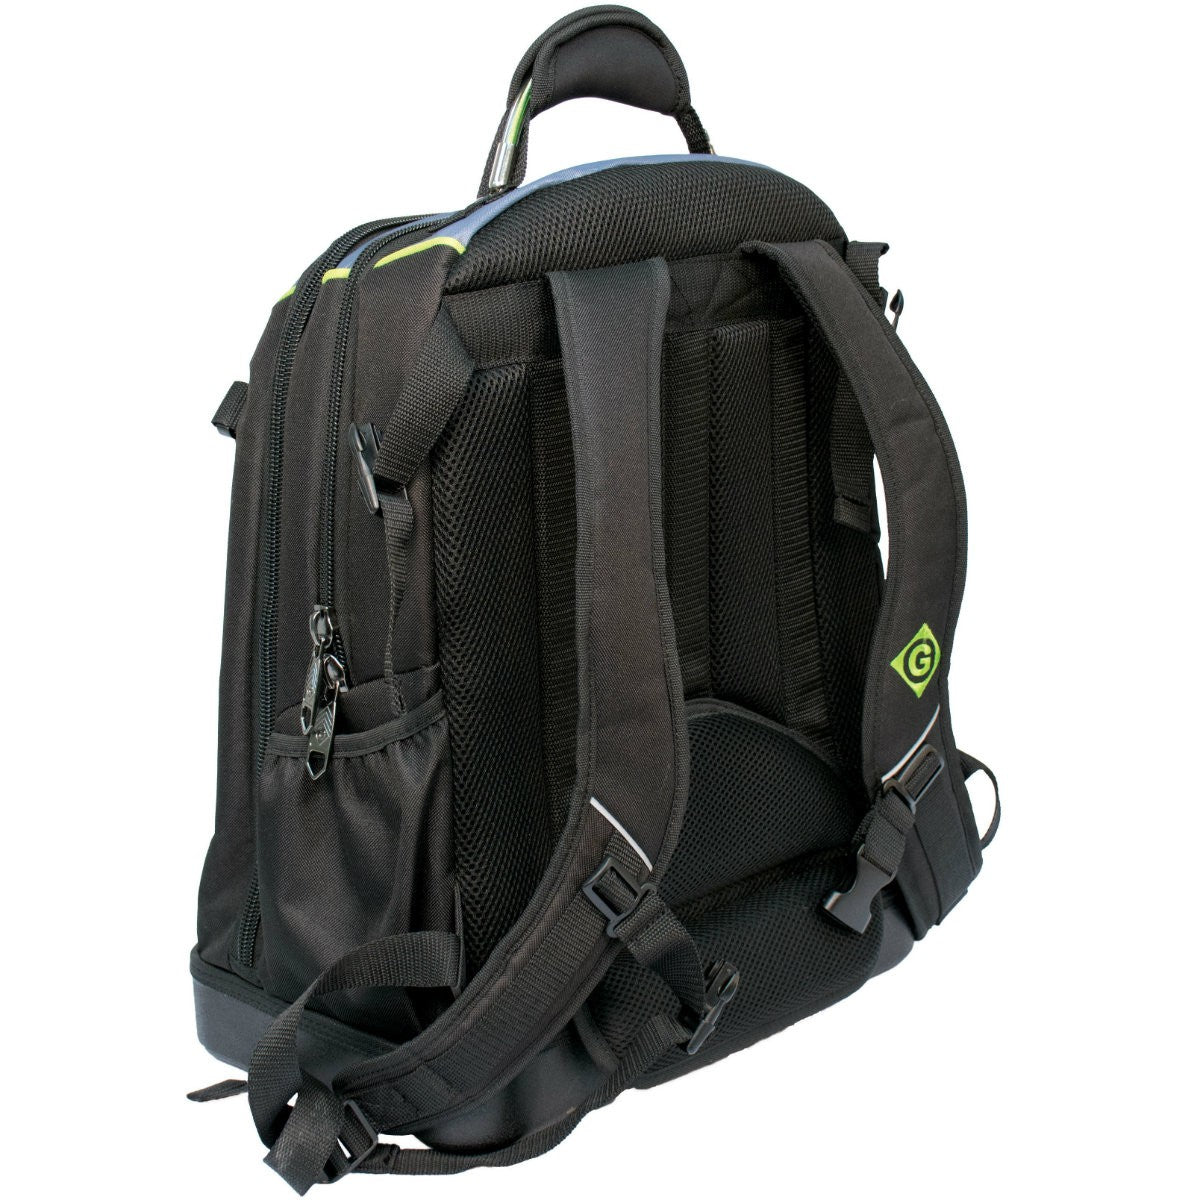 Greenlee 0158-27 Professional Tool and Tech Backpack